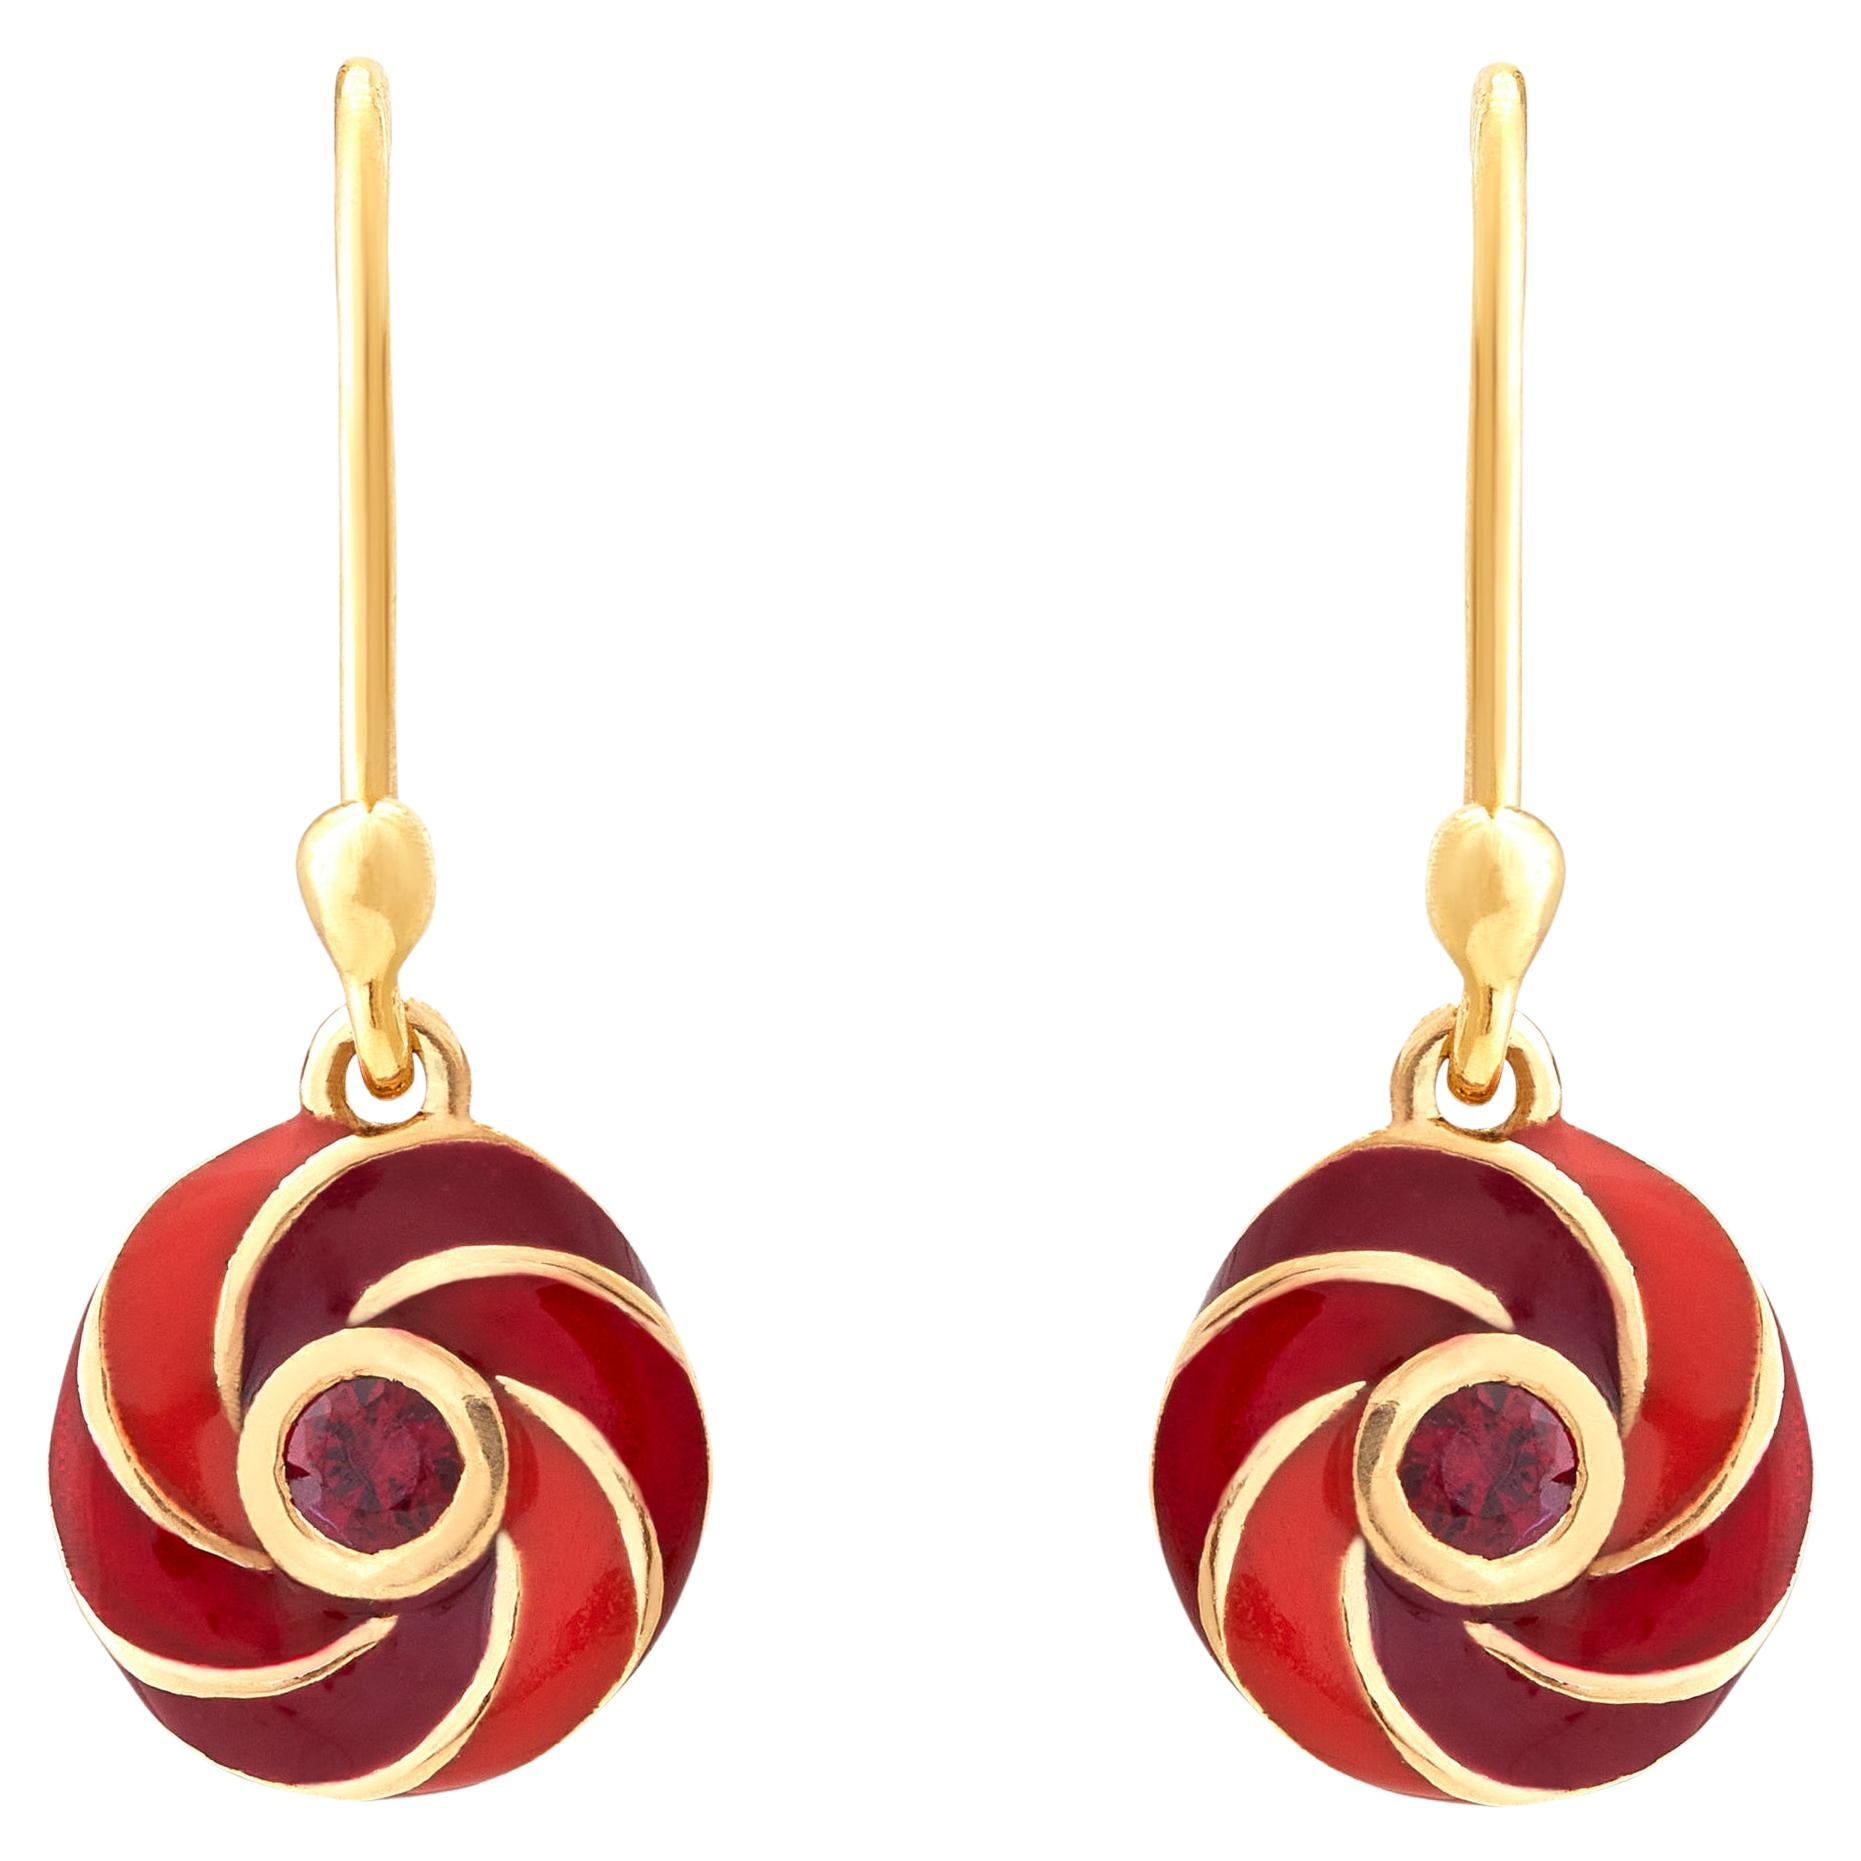 Rock Candy Cherry Bomb Drop Earrings 9 Carat Gold For Sale